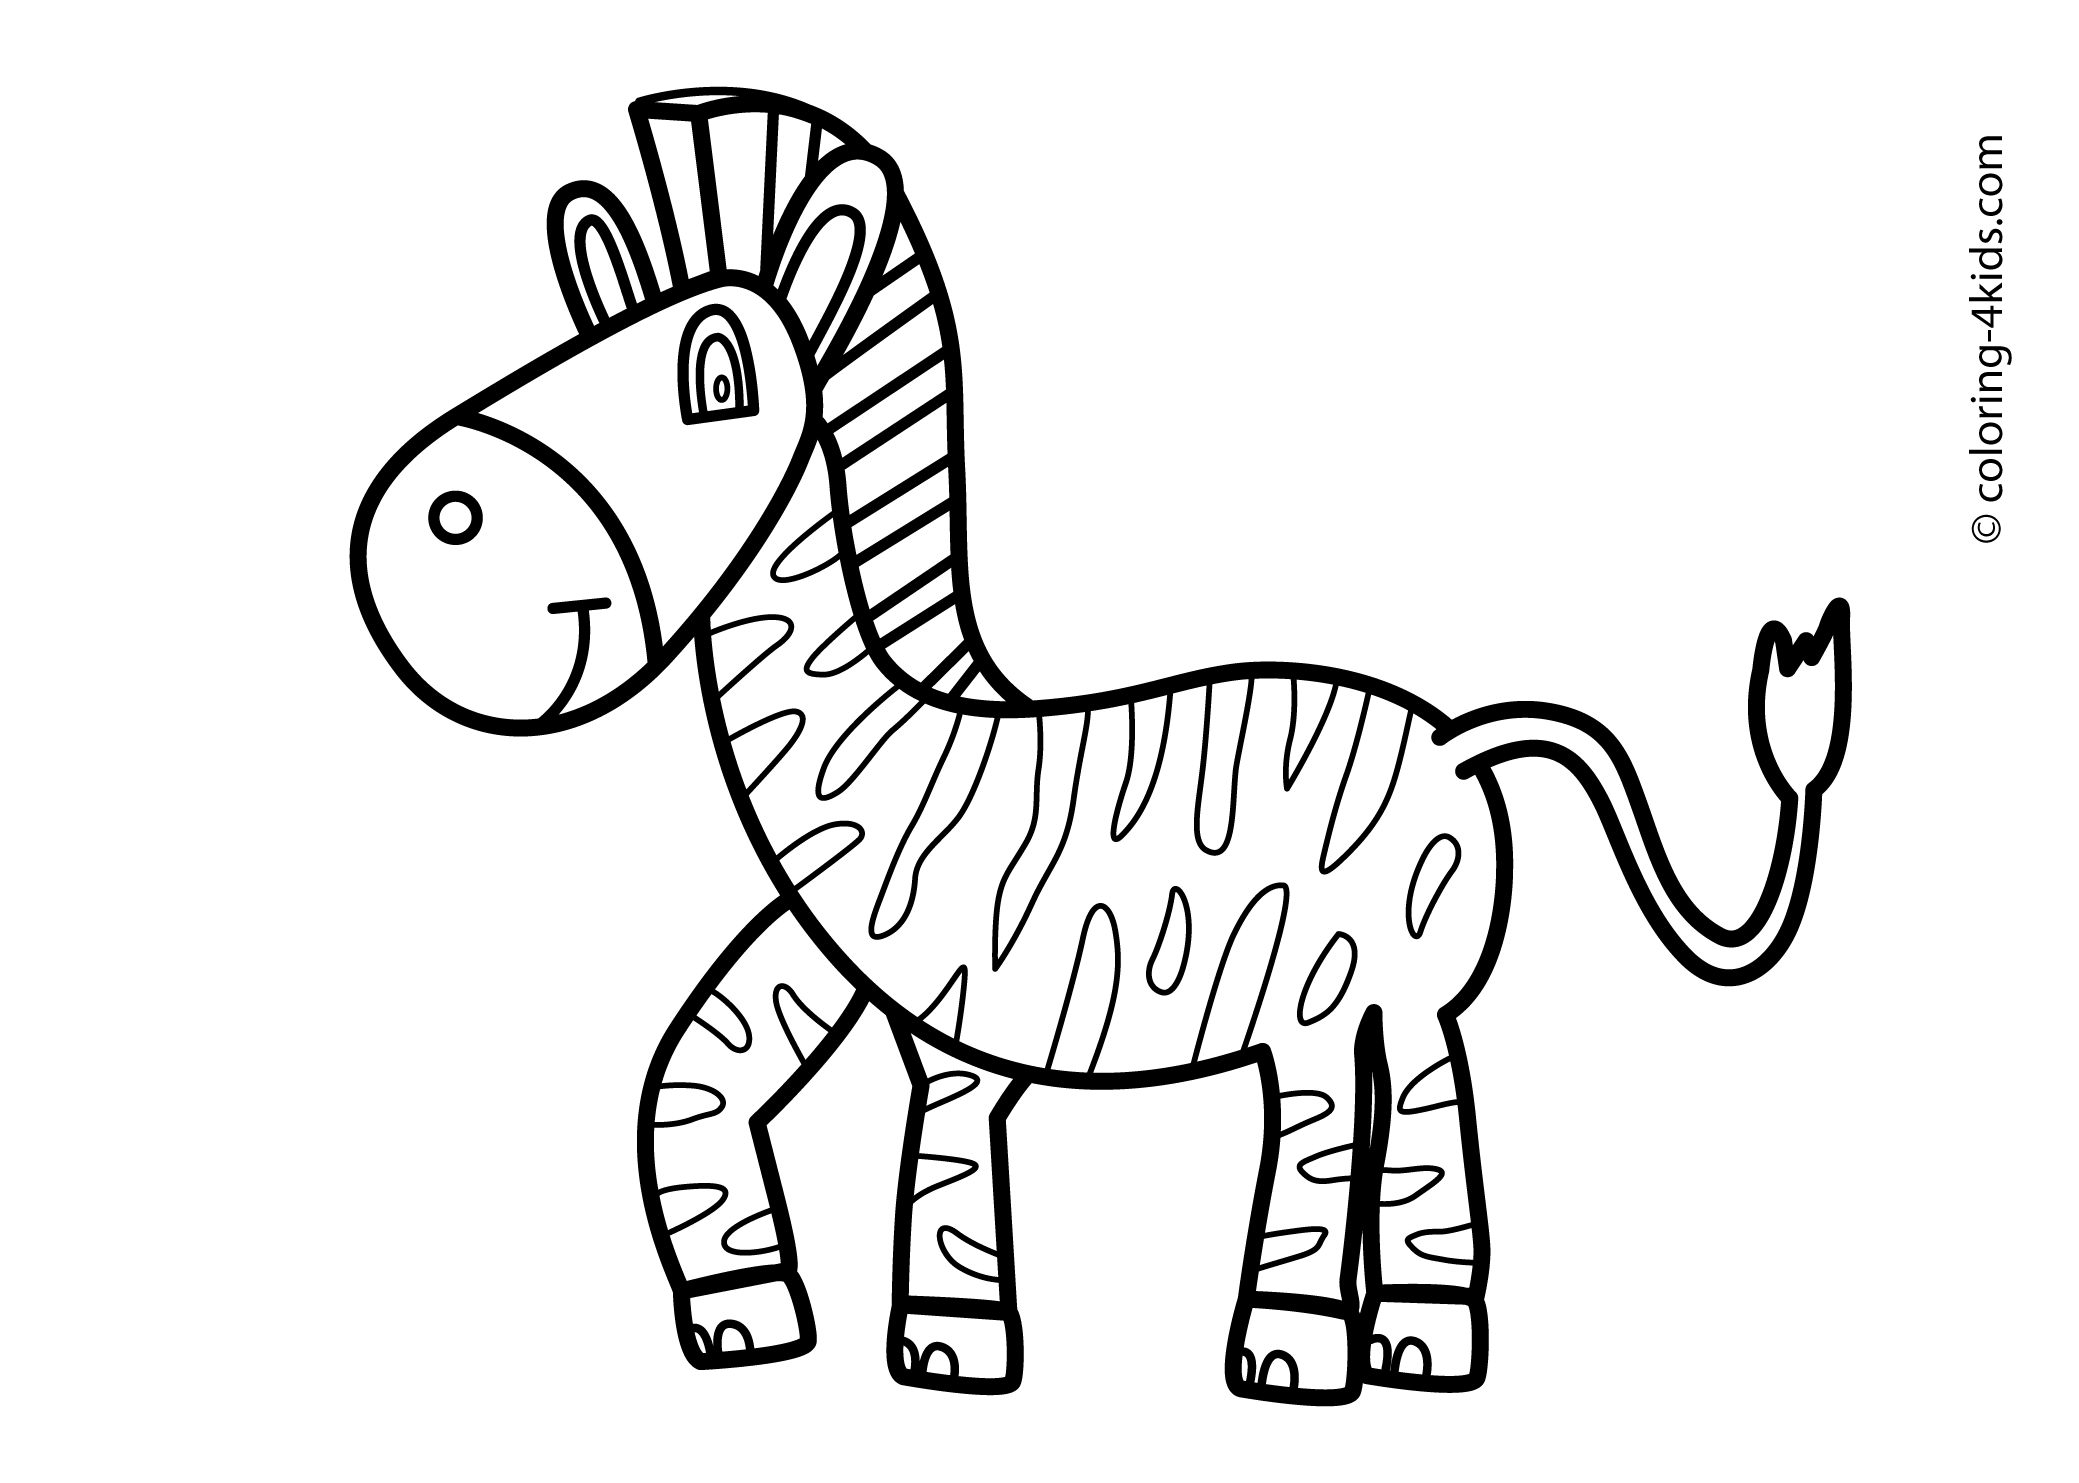 Zebra In Line Drawing - Cliparts.co